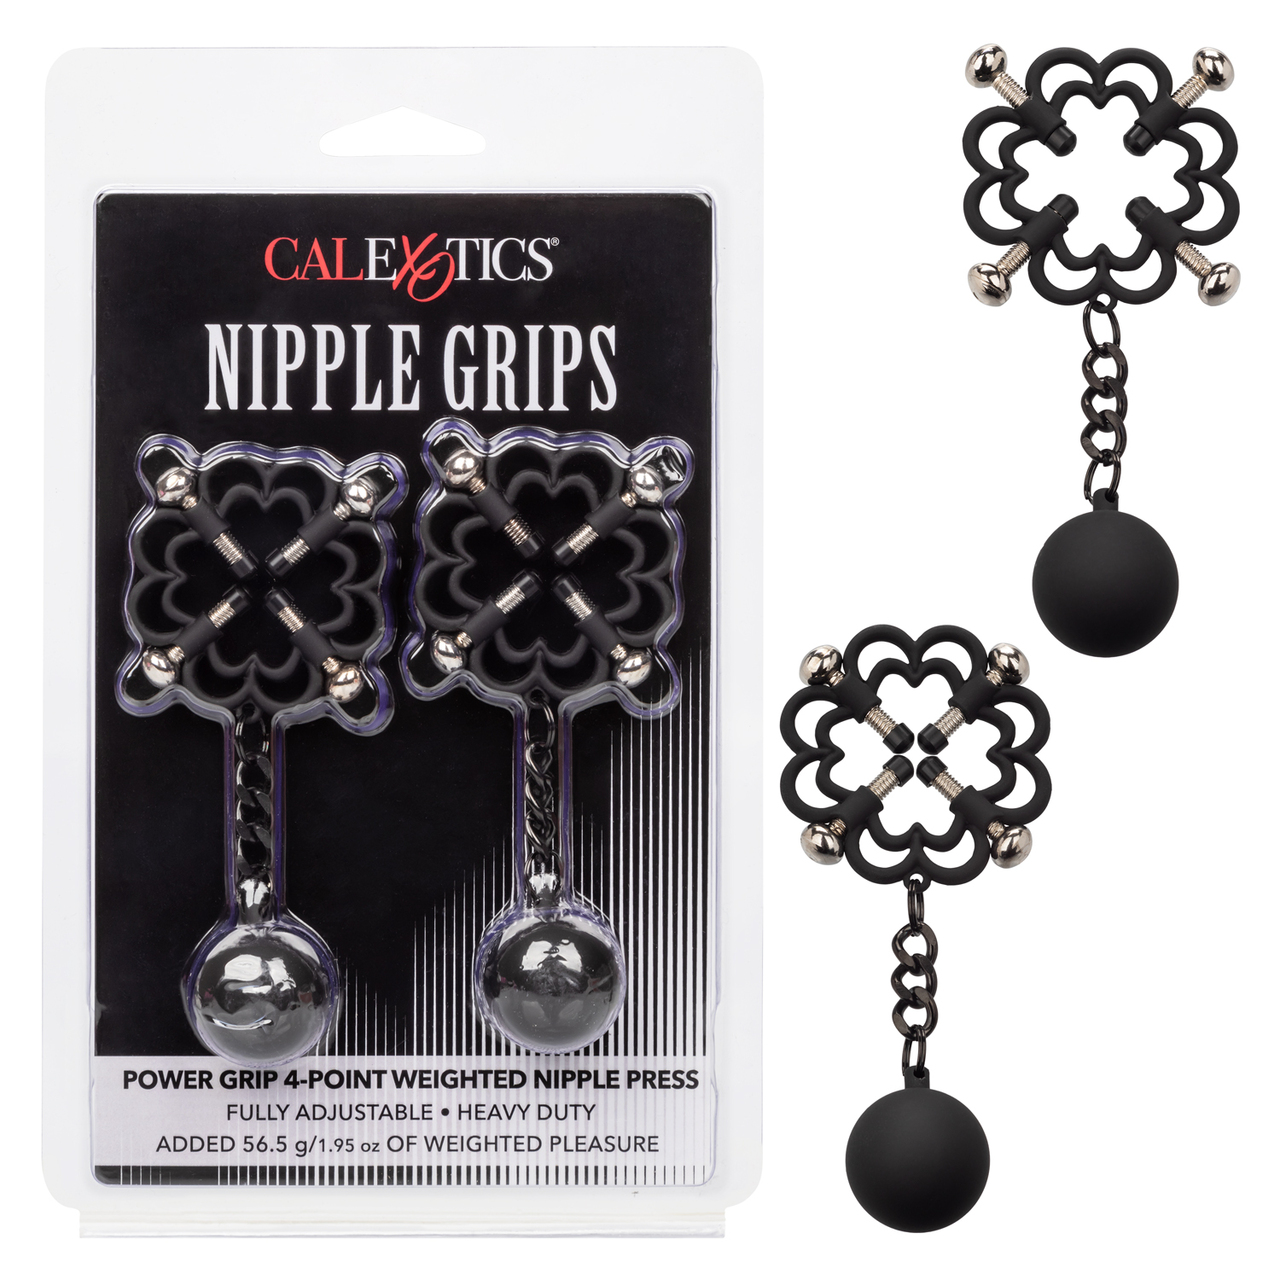 NIPPLE GRIPS POWER GRIP 4 POINT WEIGHTED PRESS - Click Image to Close